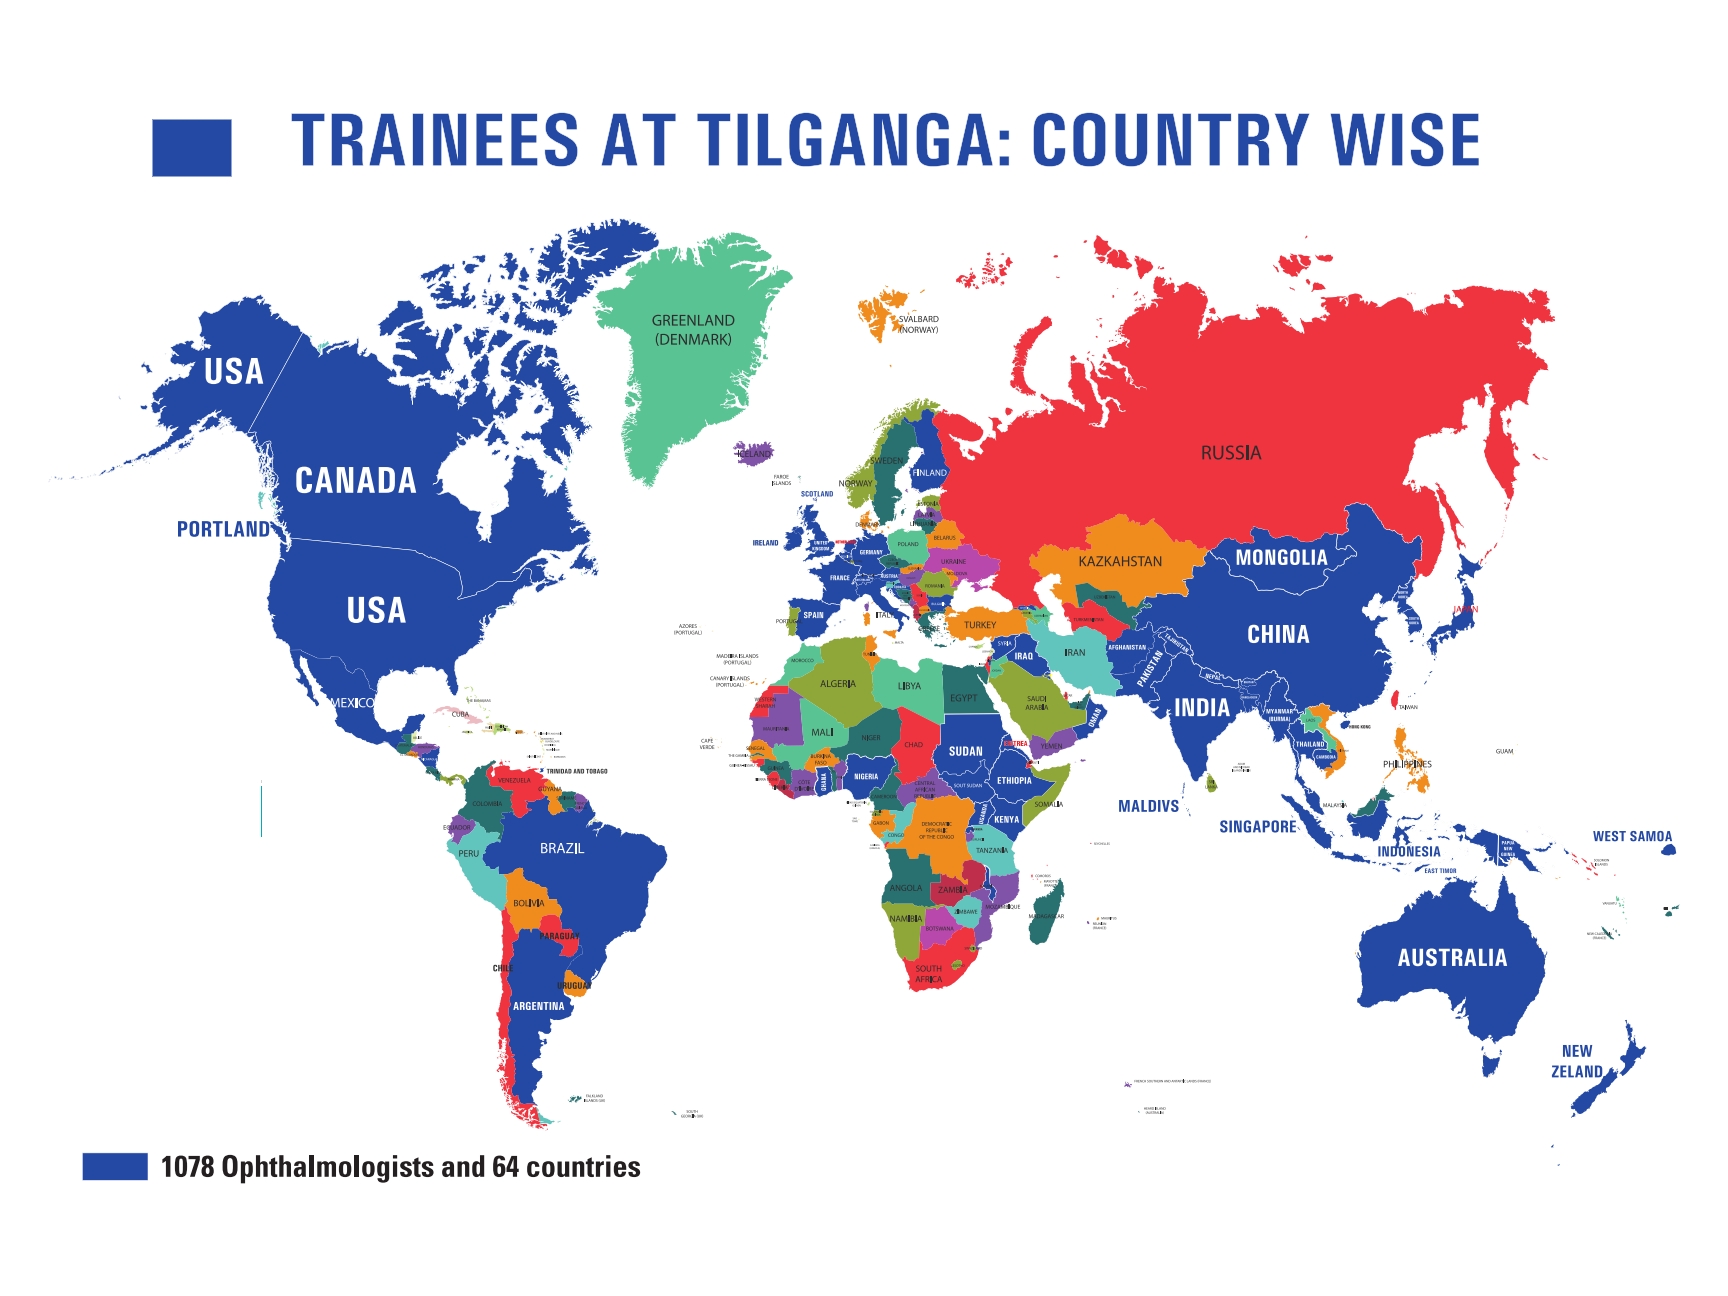 Fellows/Trainees at Tilganga Institute of Ophthalmology: Country Wise